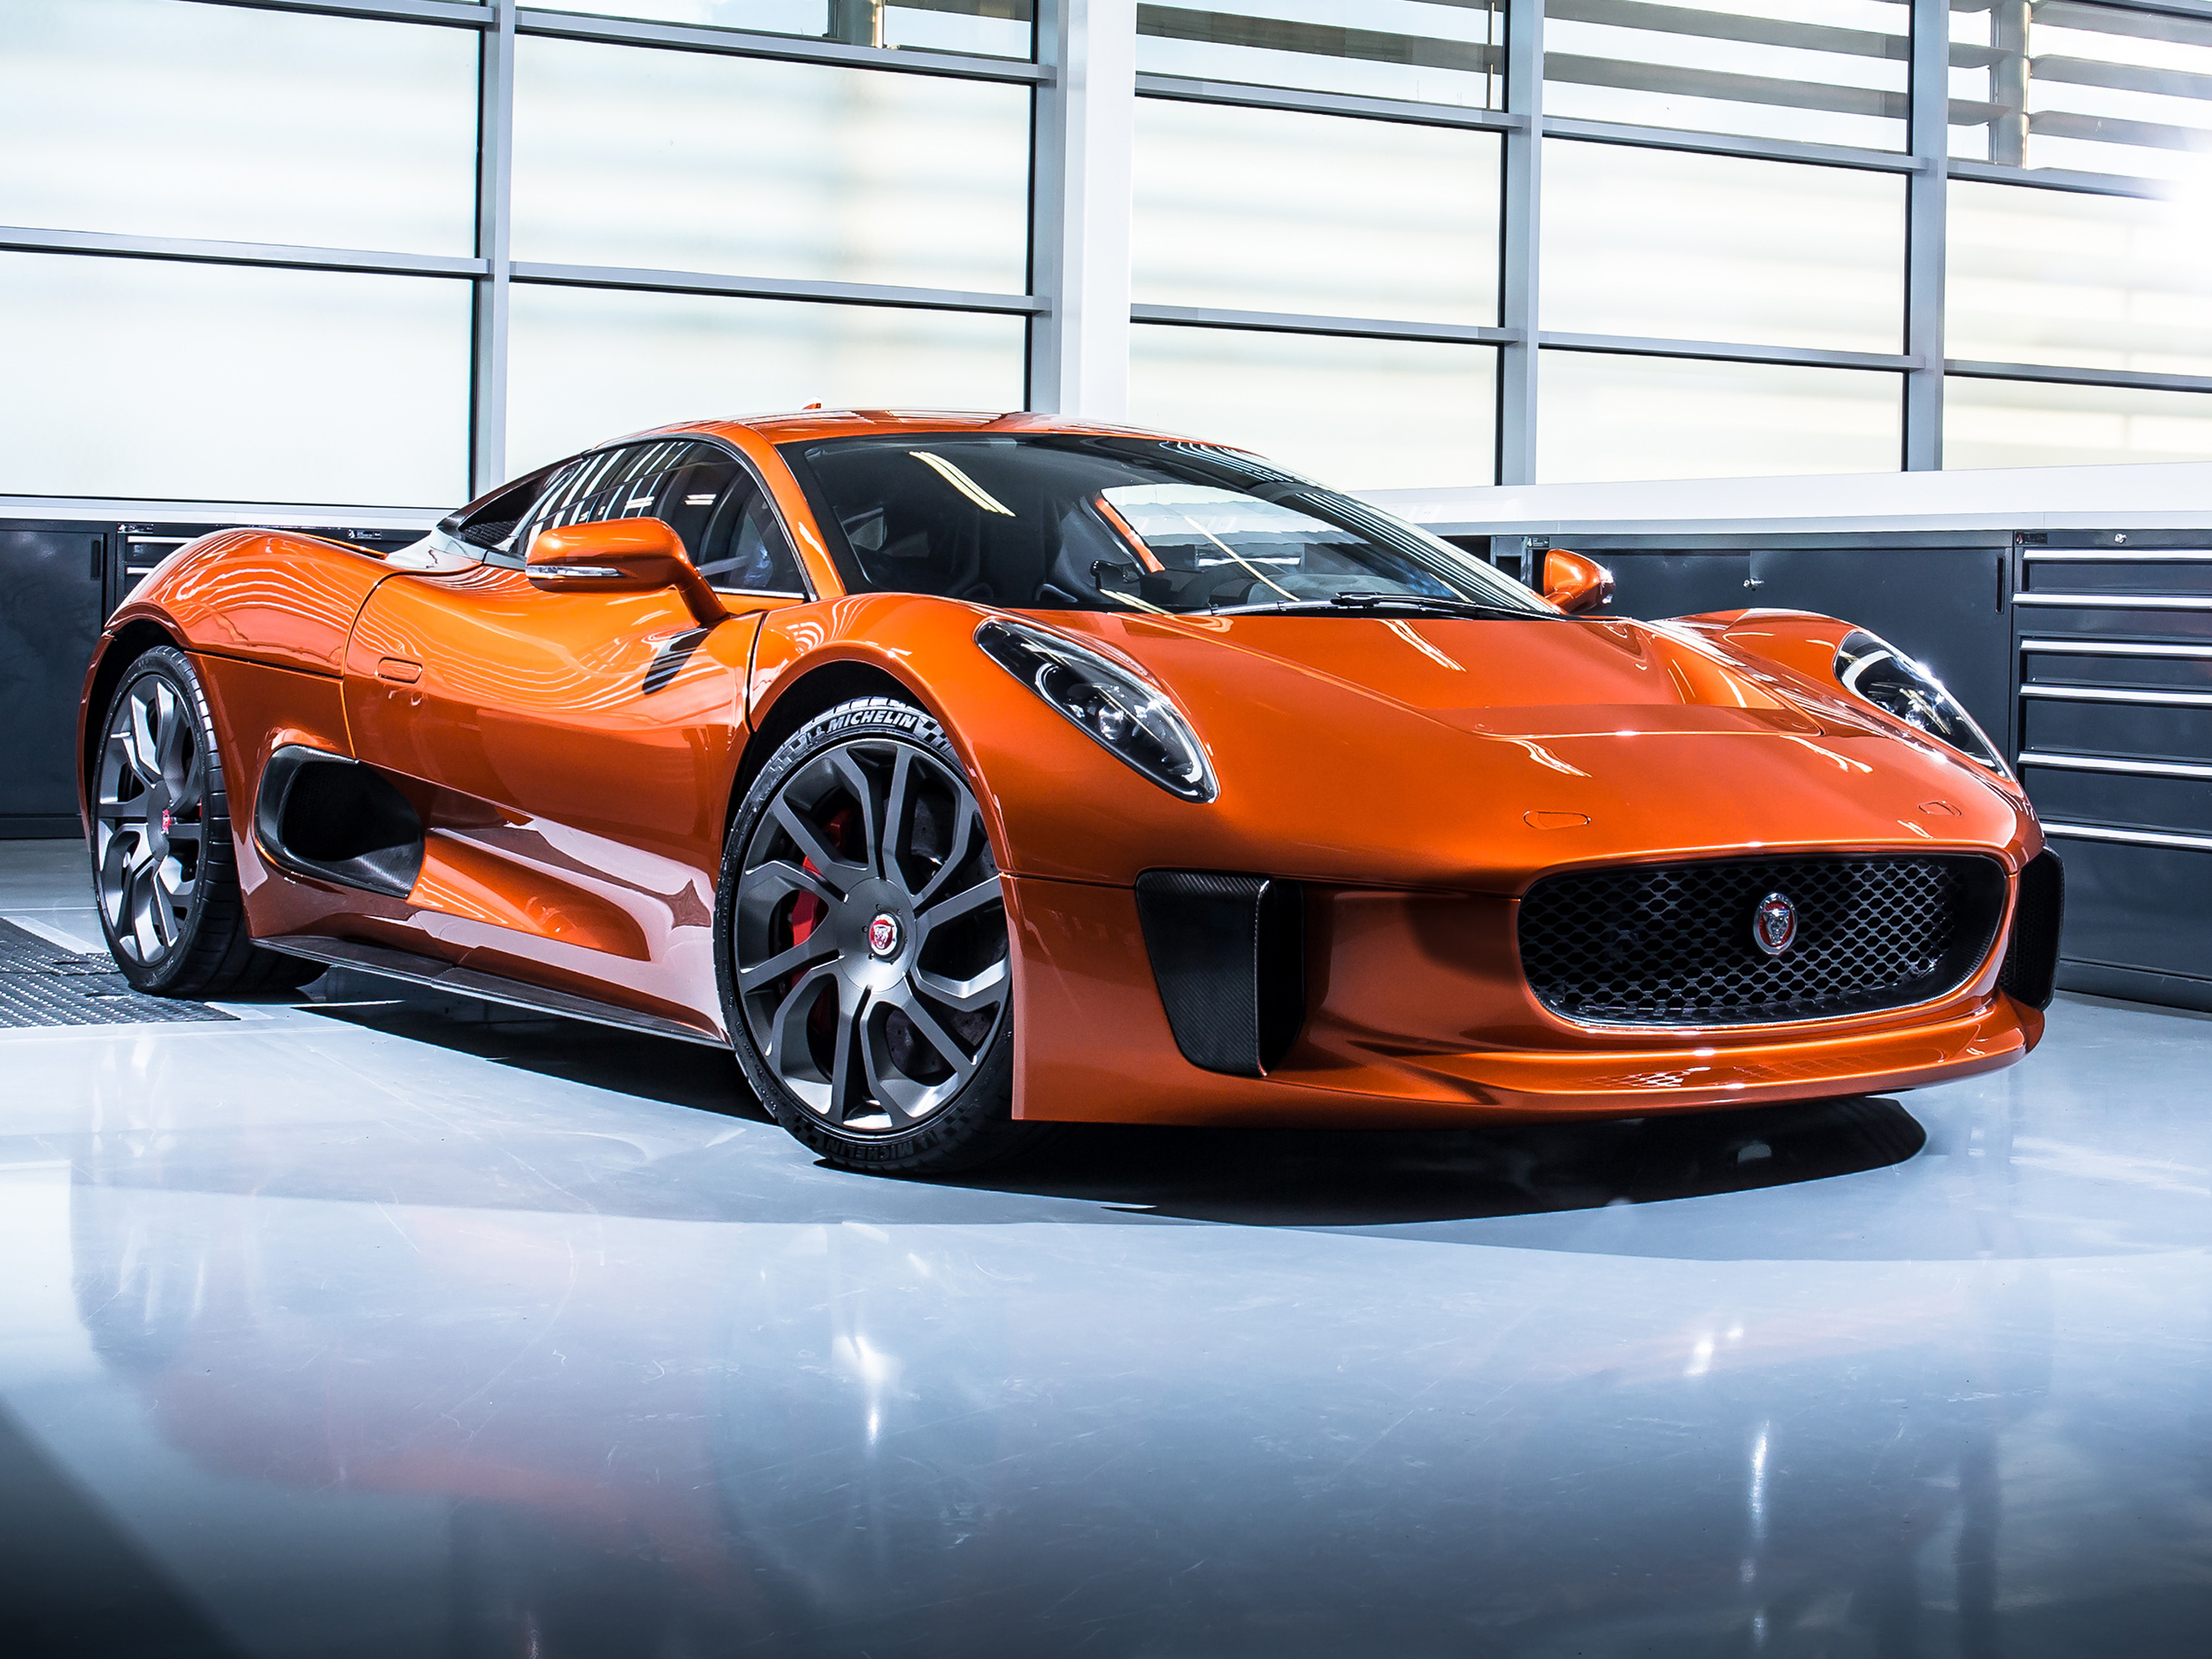 Jaguar to feature at WIRED2015